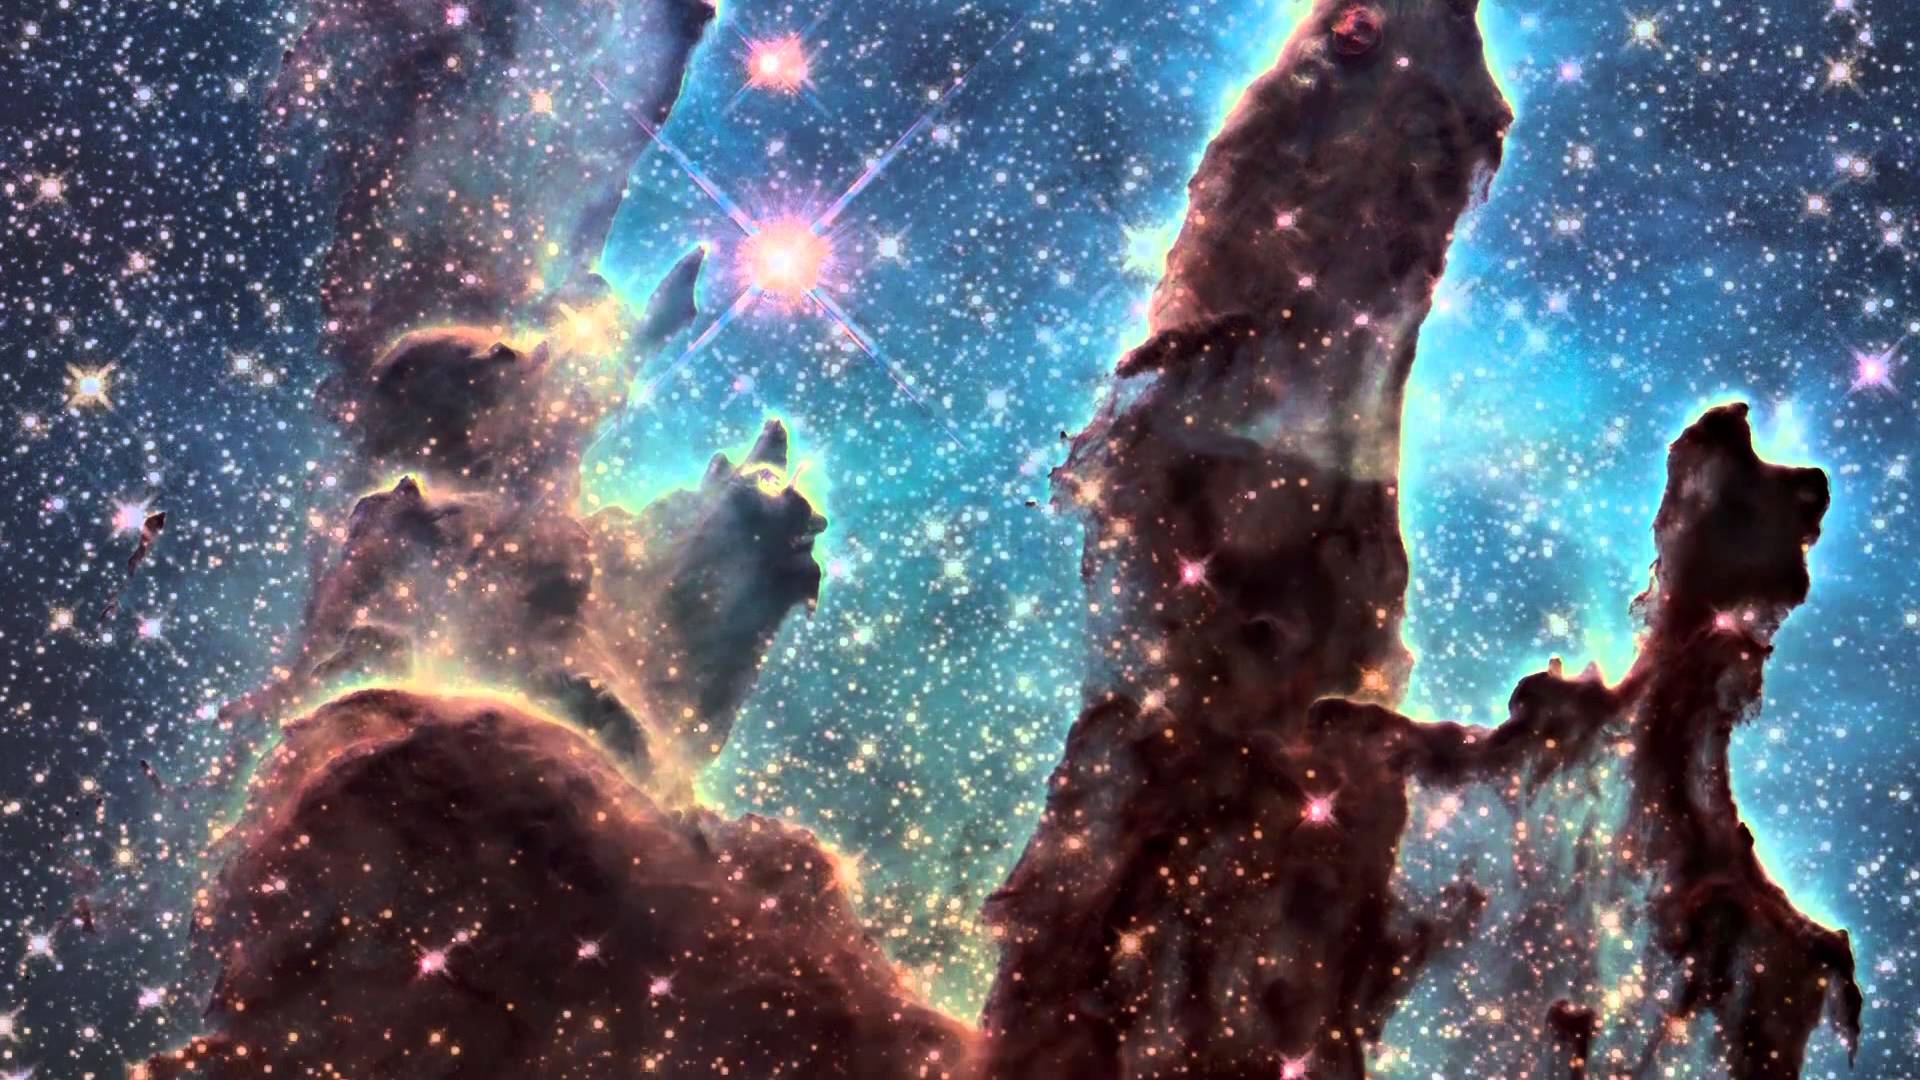 Pillars of Creation Wallpaper 1920x1080 48 pictures